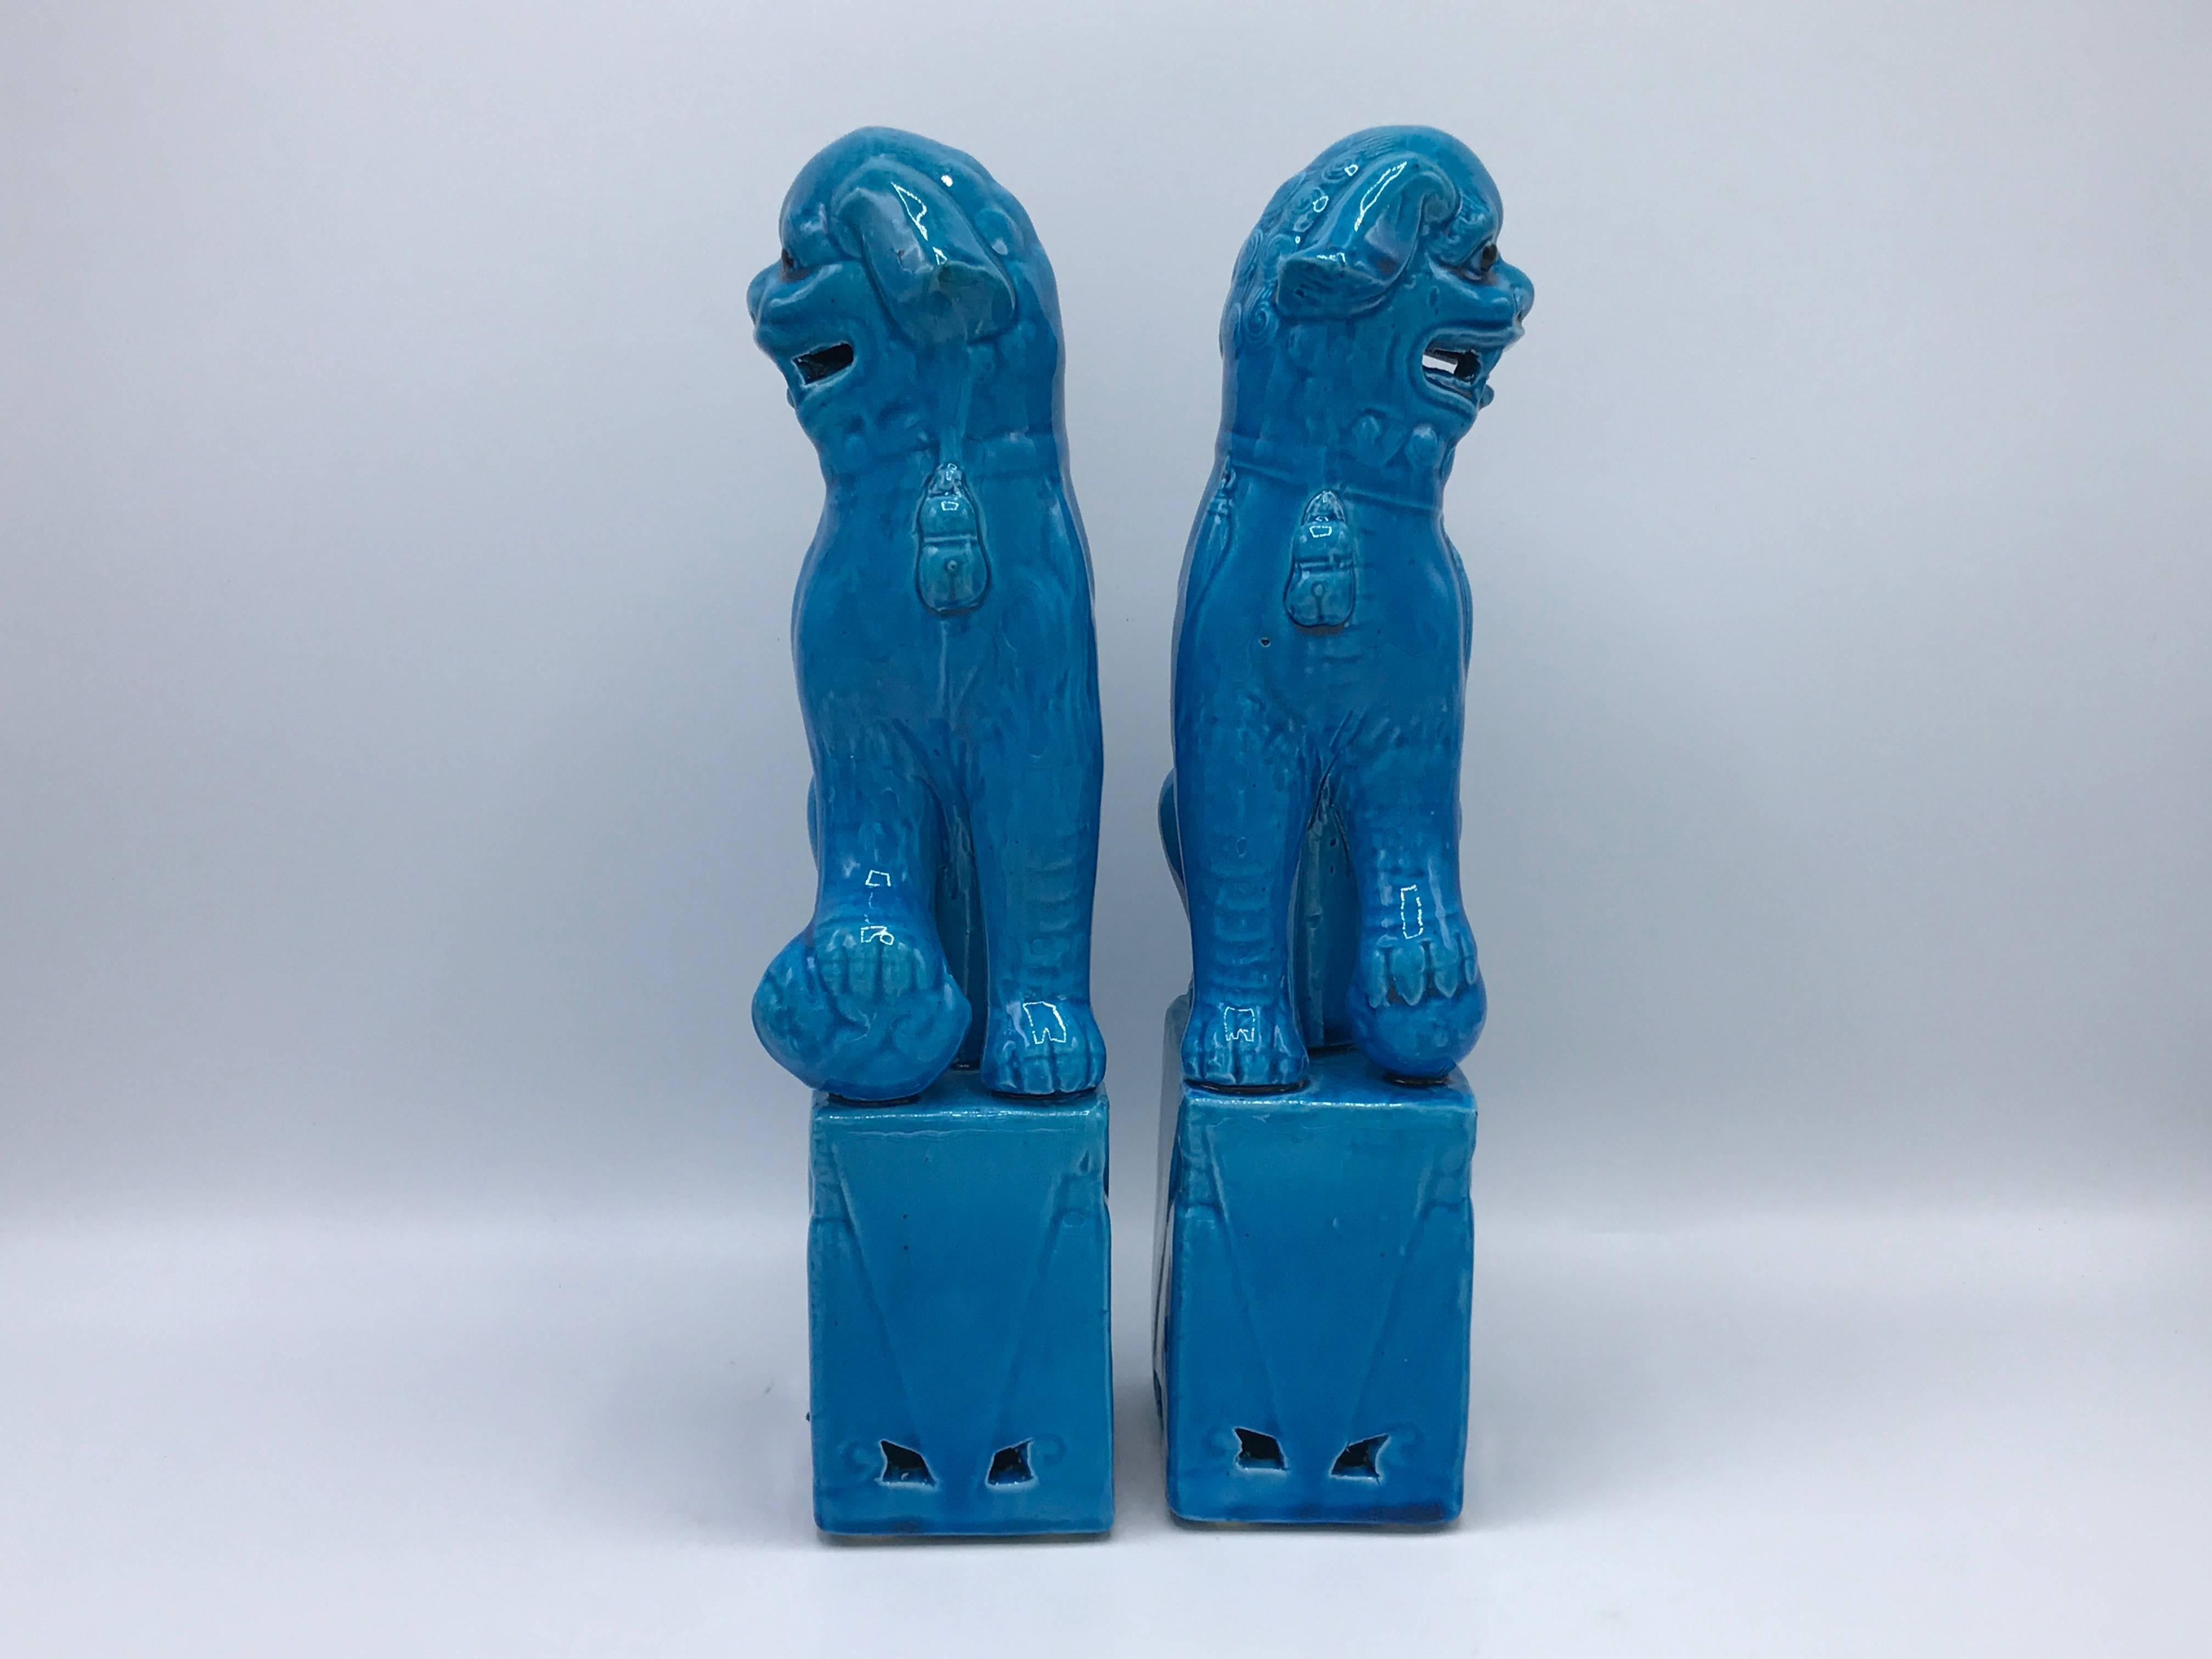 Offered is a stunning pair of 1970s turquoise glazed ceramic foo dogs.